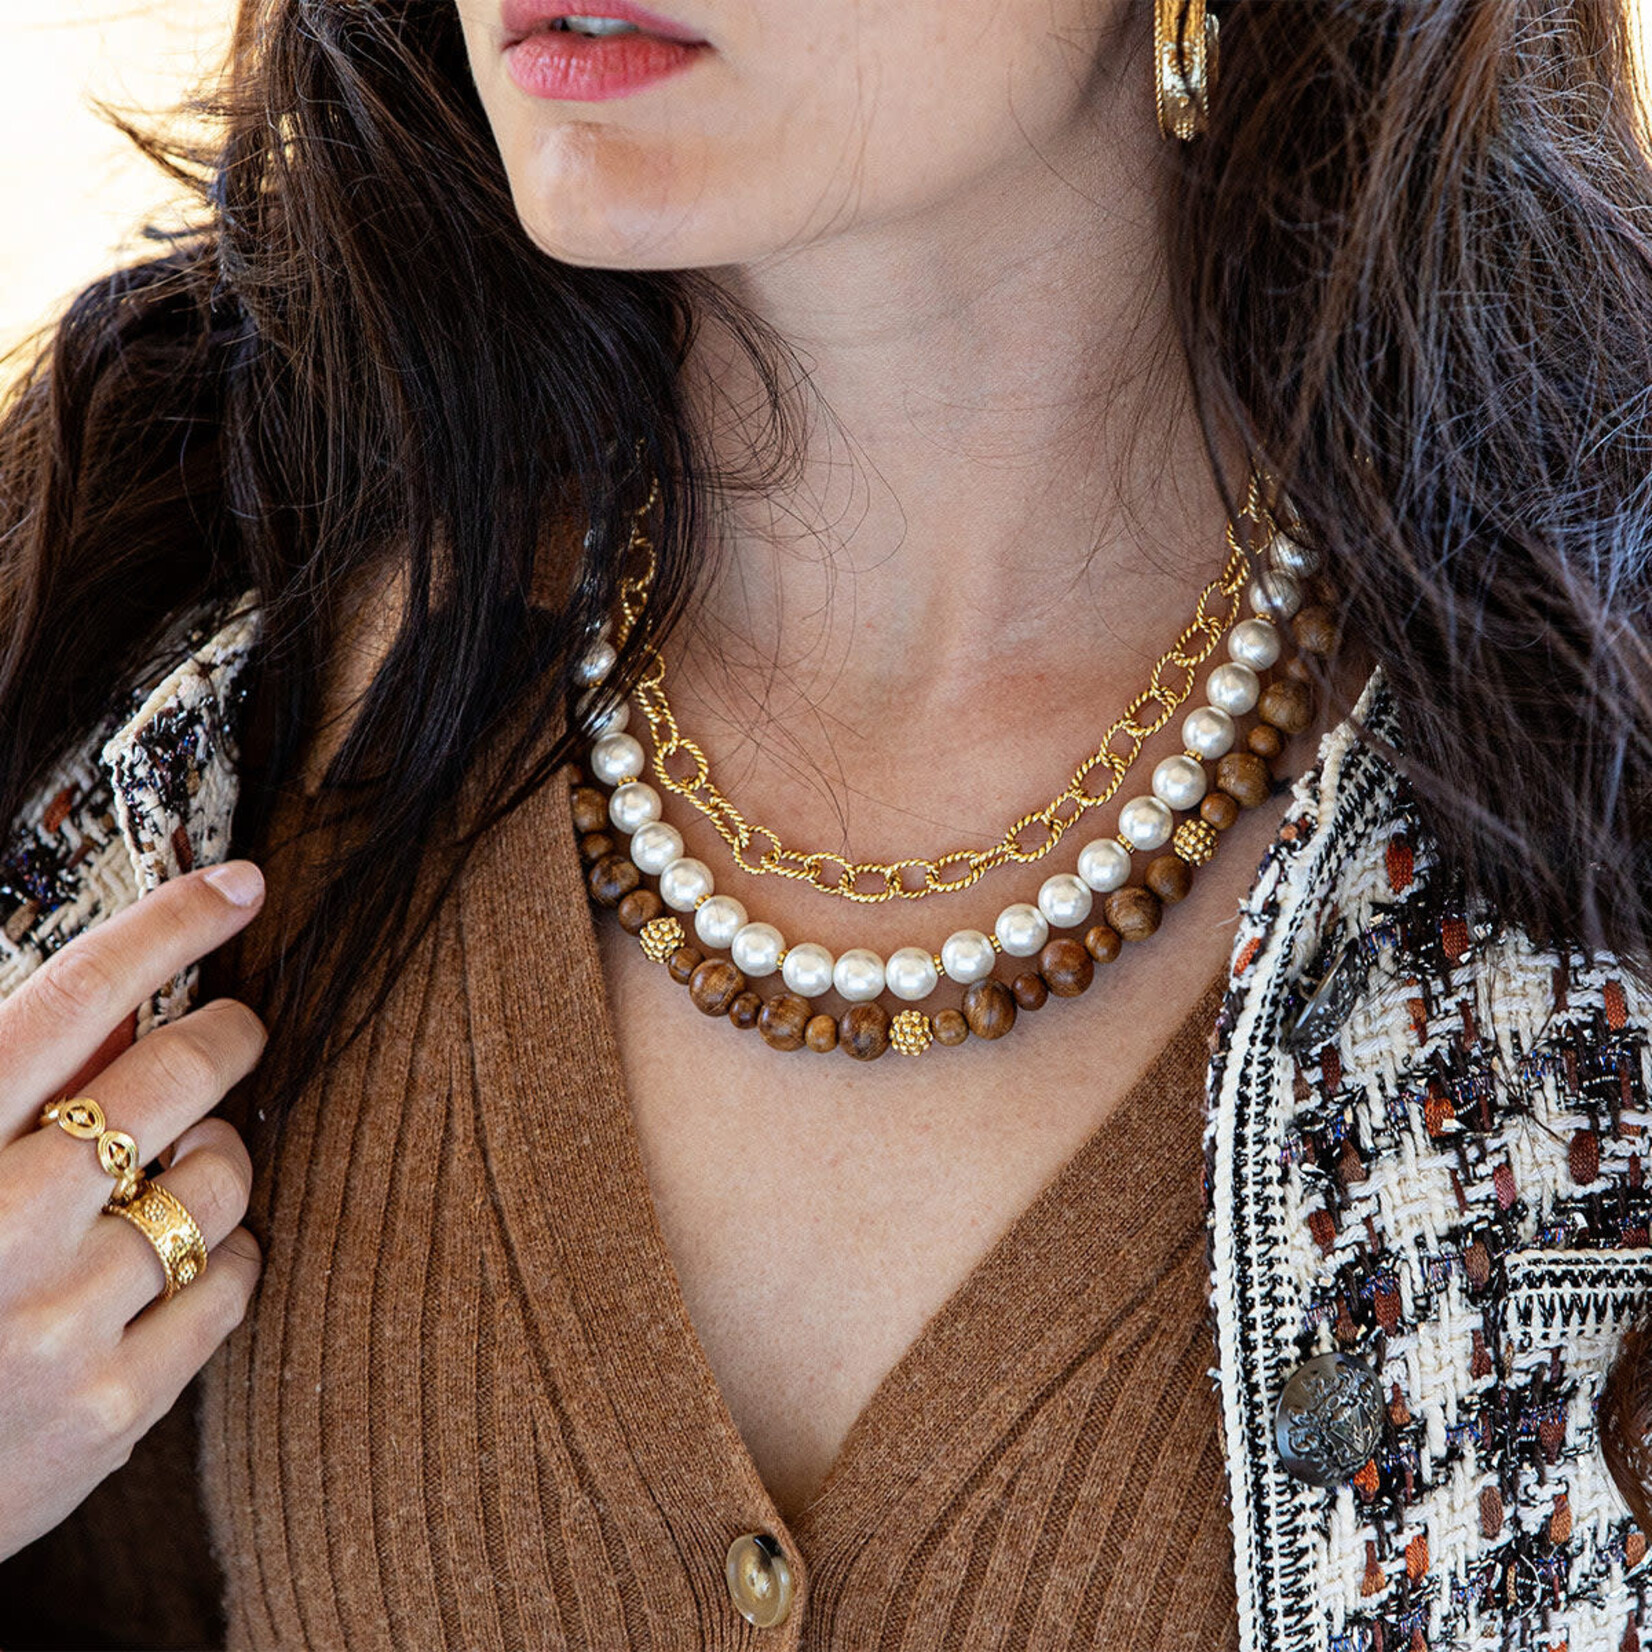 CAPUCINE DE WULF Earth Goddess Necklace with Teak/Pearls